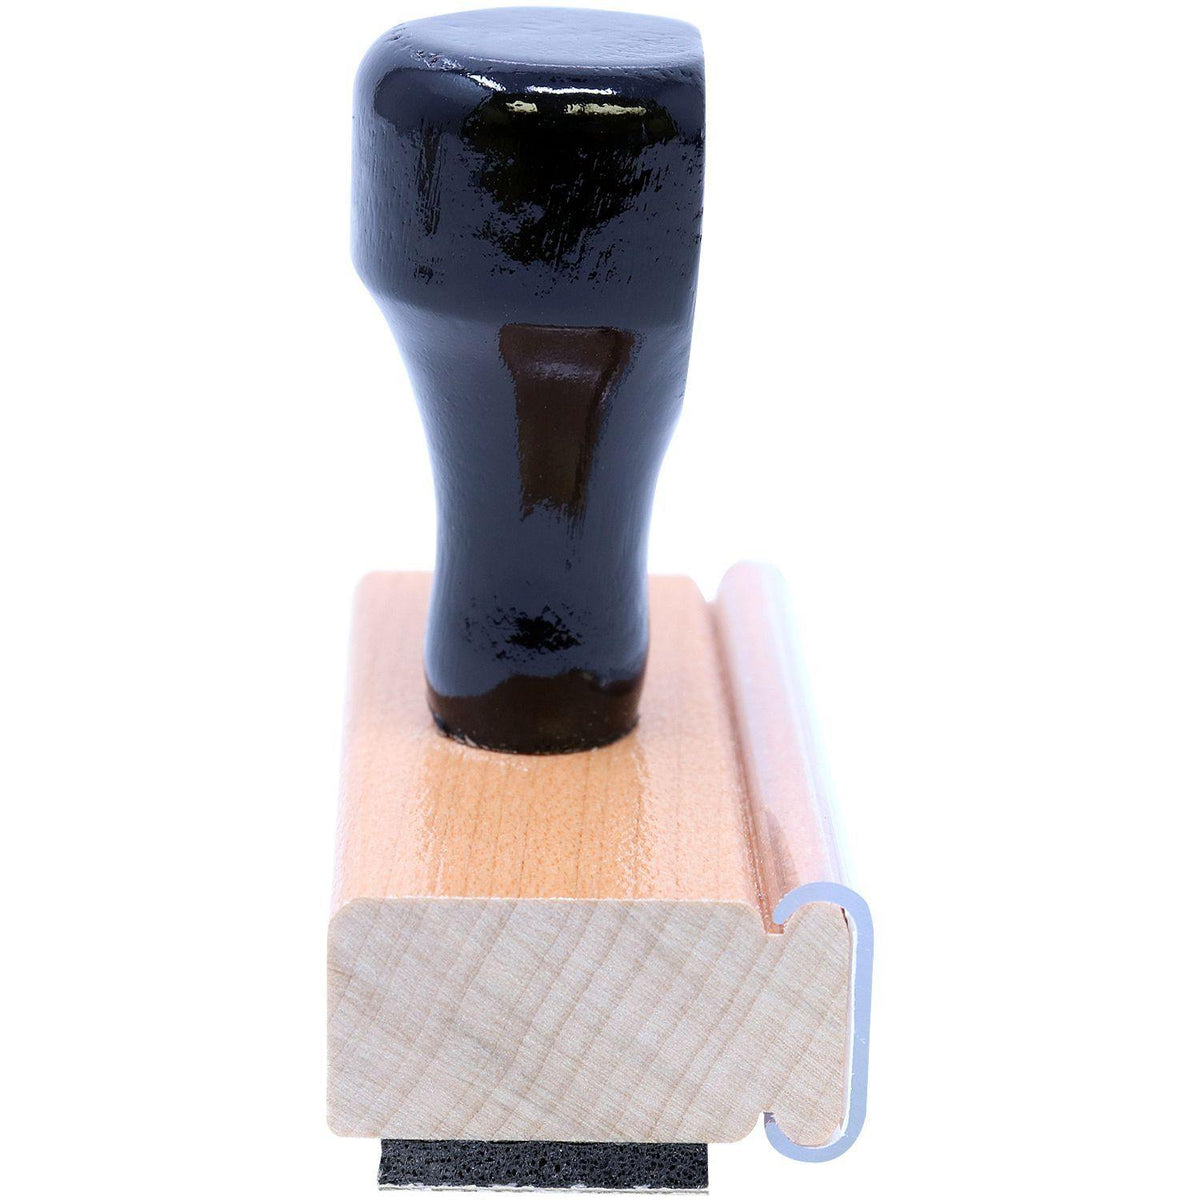 Round Copy Rubber Stamp - Engineer Seal Stamps - Brand_Acorn, Impression Size_Small, Stamp Type_Regular Stamp, Type of Use_General, Type of Use_Office